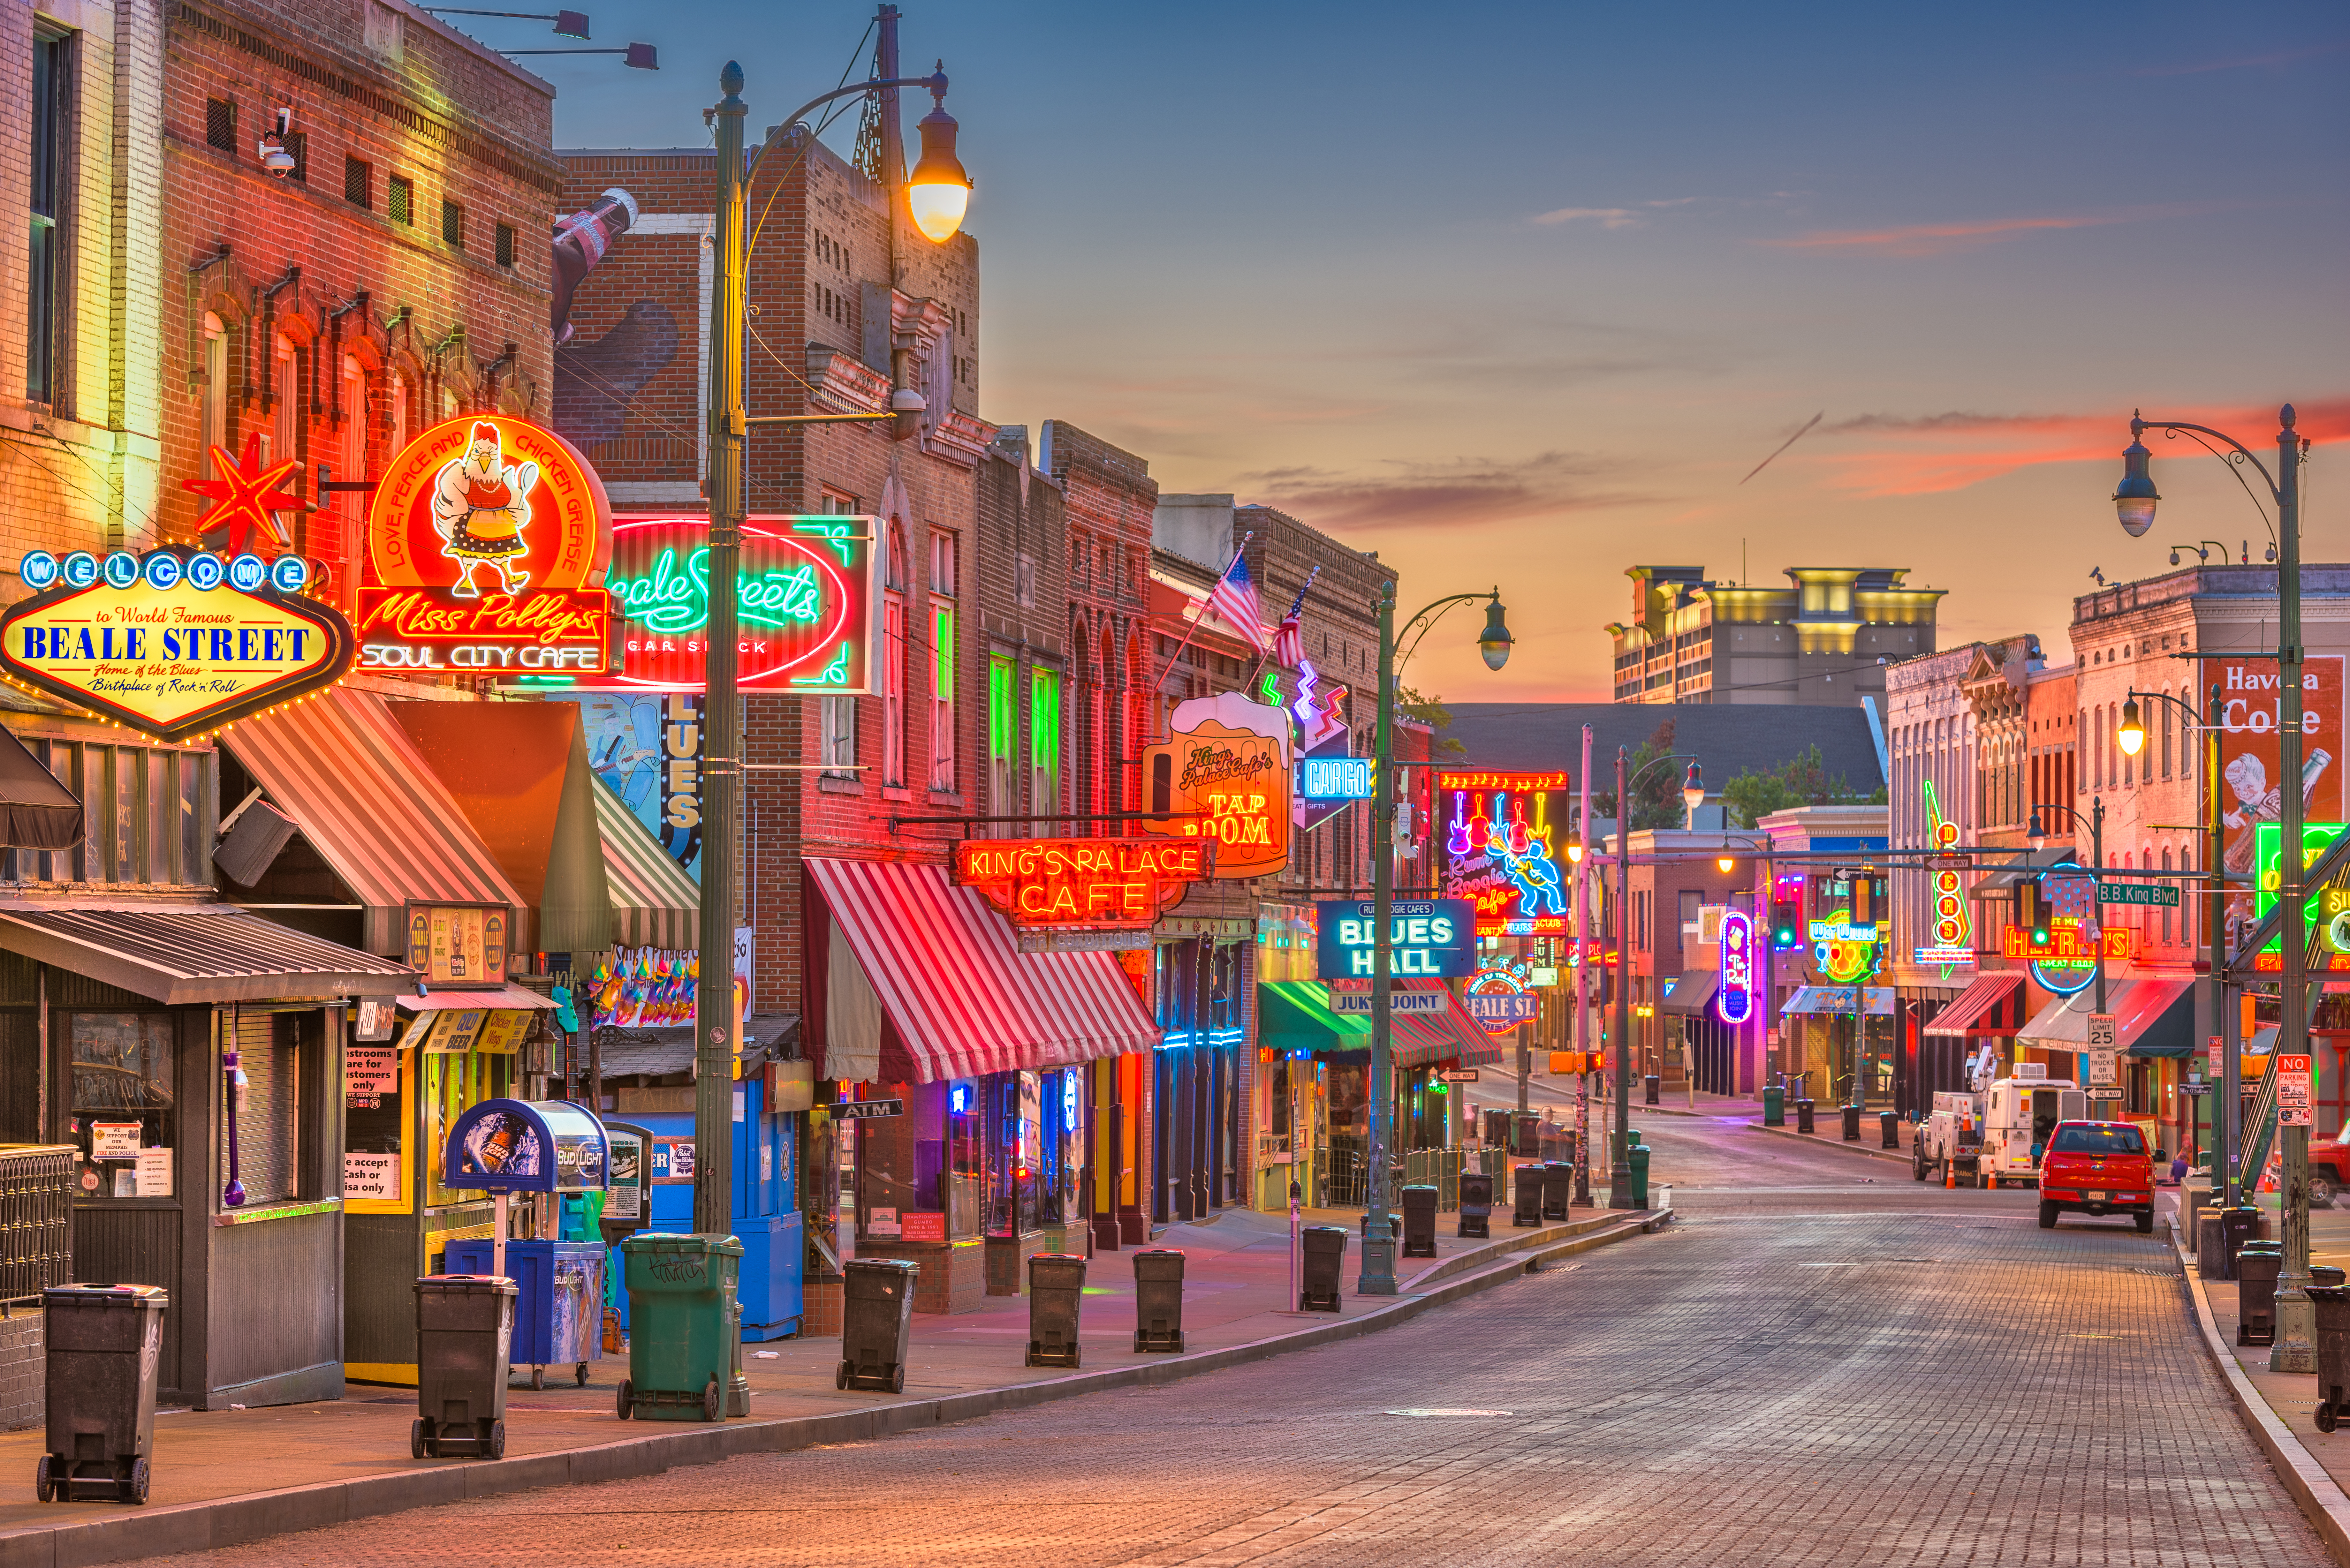 Blues Clubs on historic Beale Street at twilight, Memphis, Tennessee